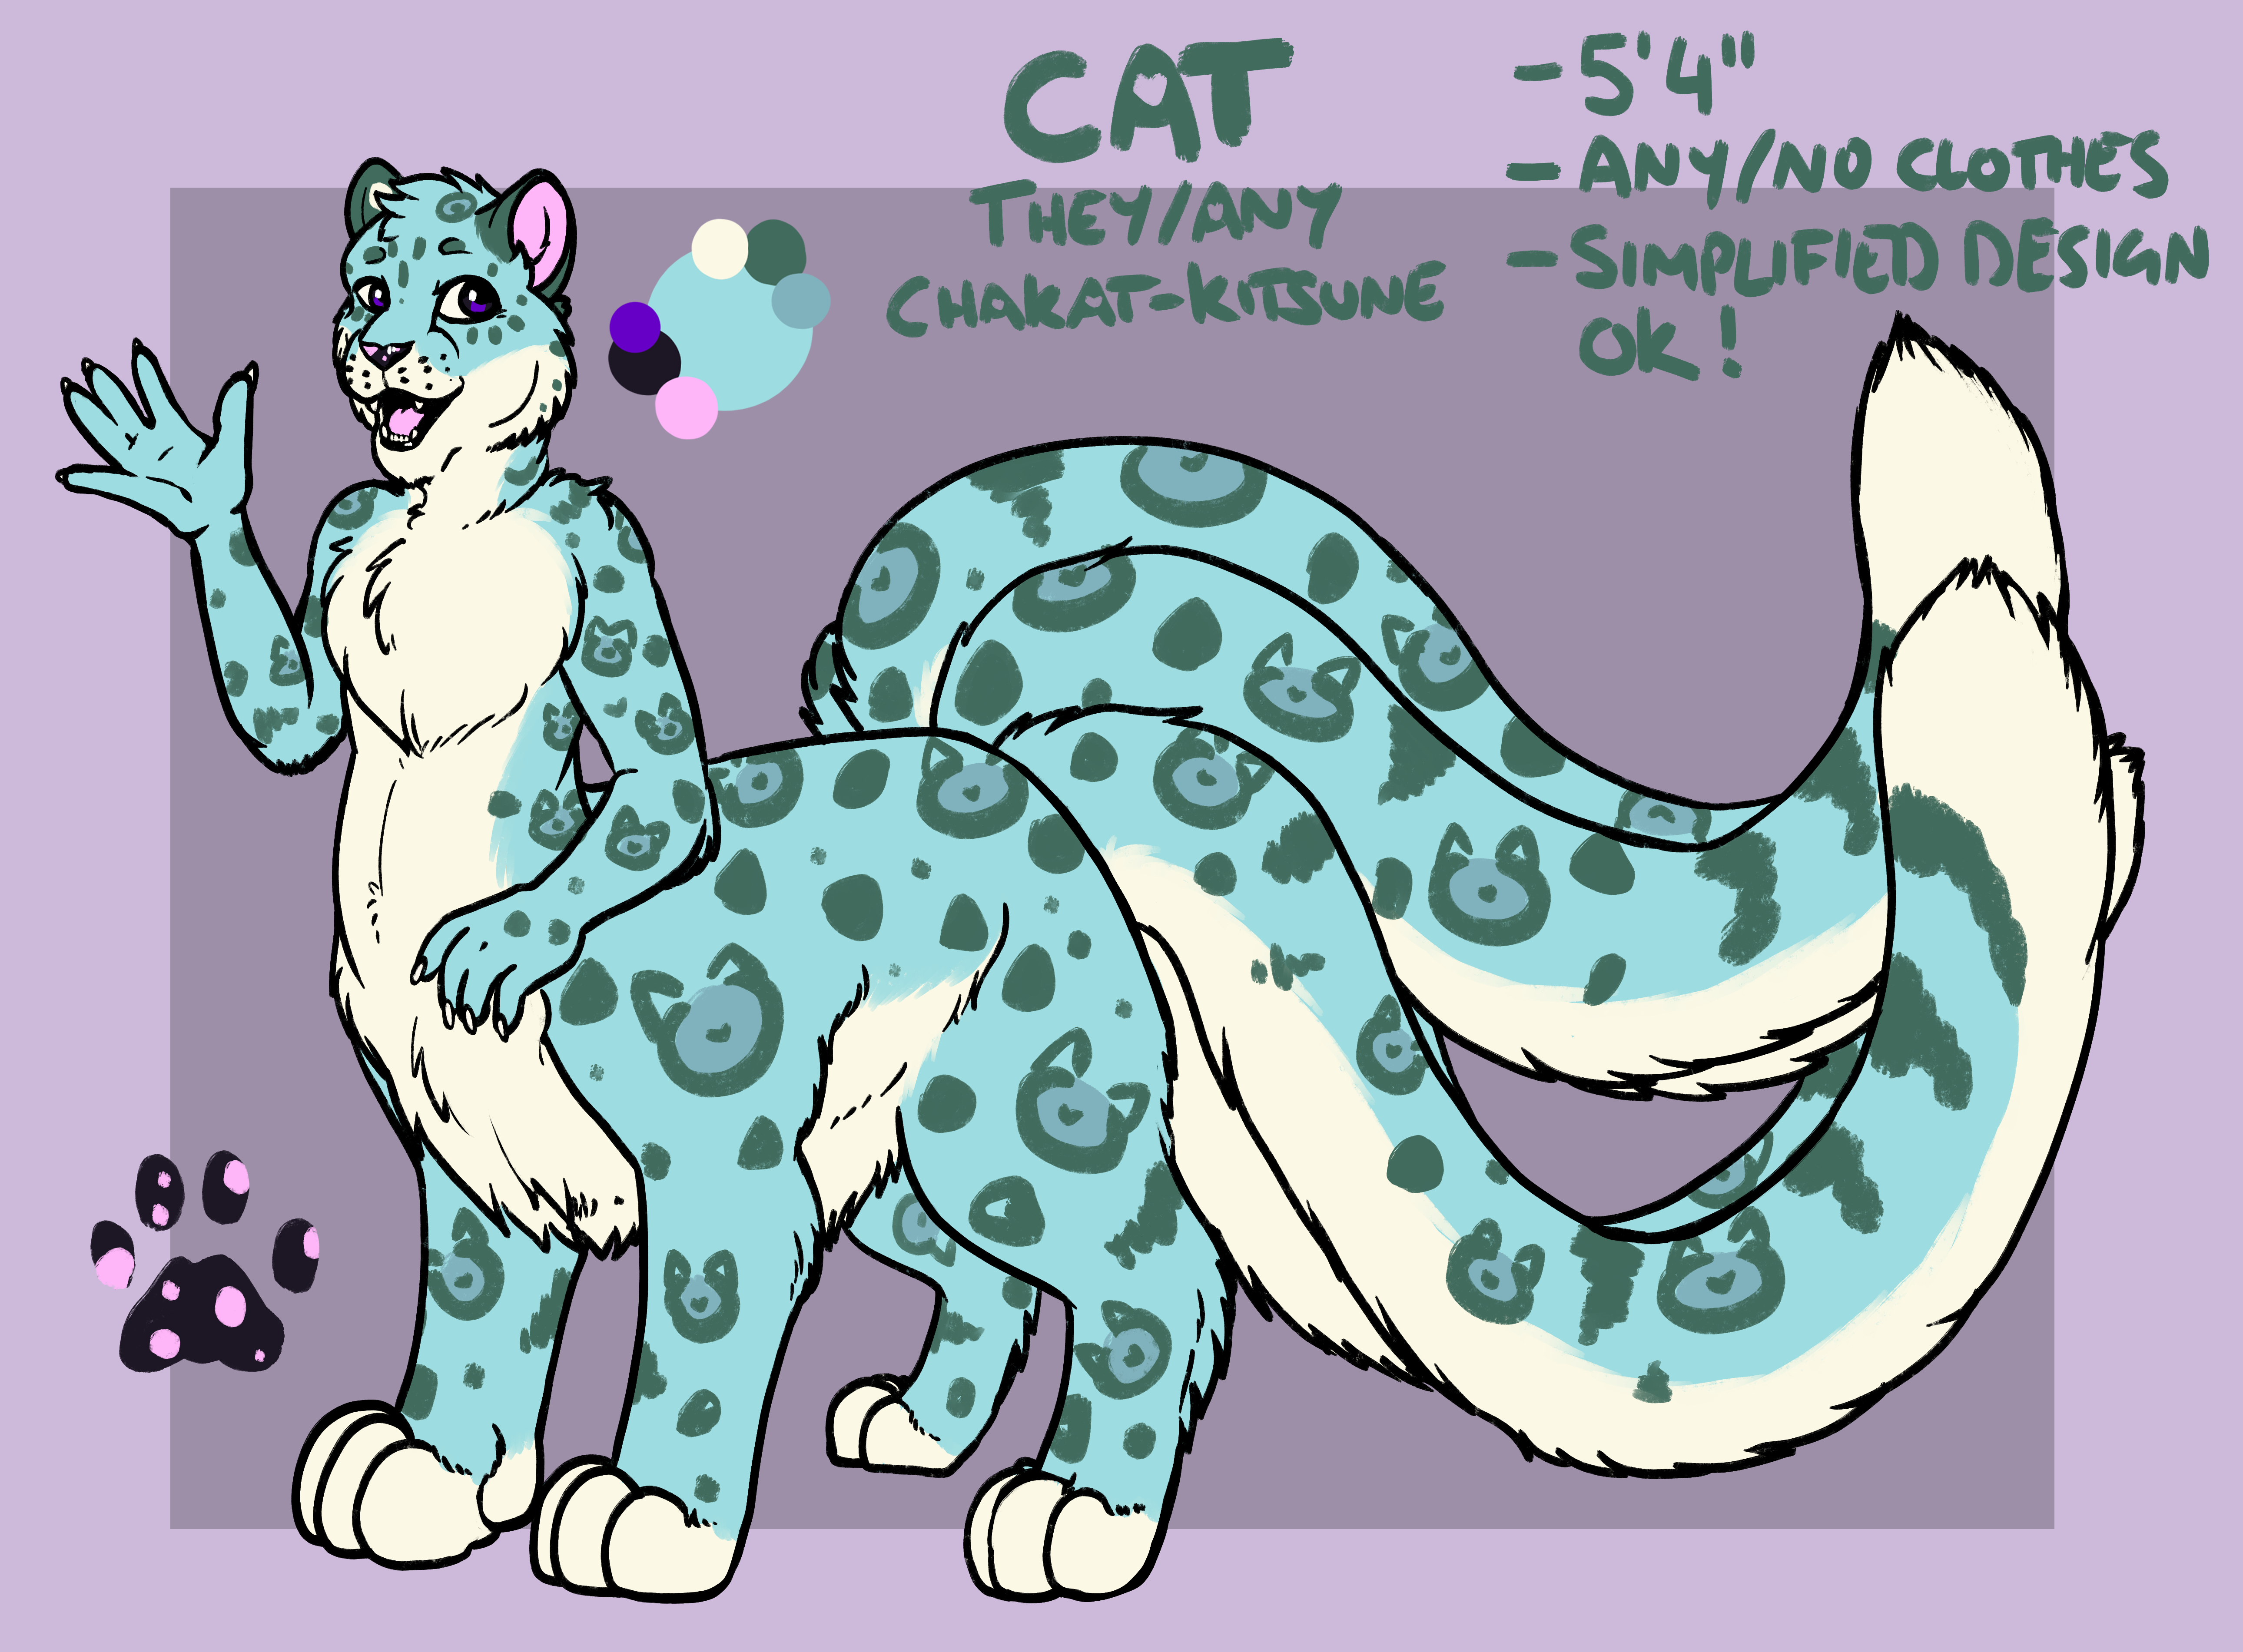 A chakat-kitsune with mint and pastel yellow colored fur, and dark green rosettes in the shape of cat heads. They have purple eyes and dappled purple-pink skin and are waving in a friendly manner.